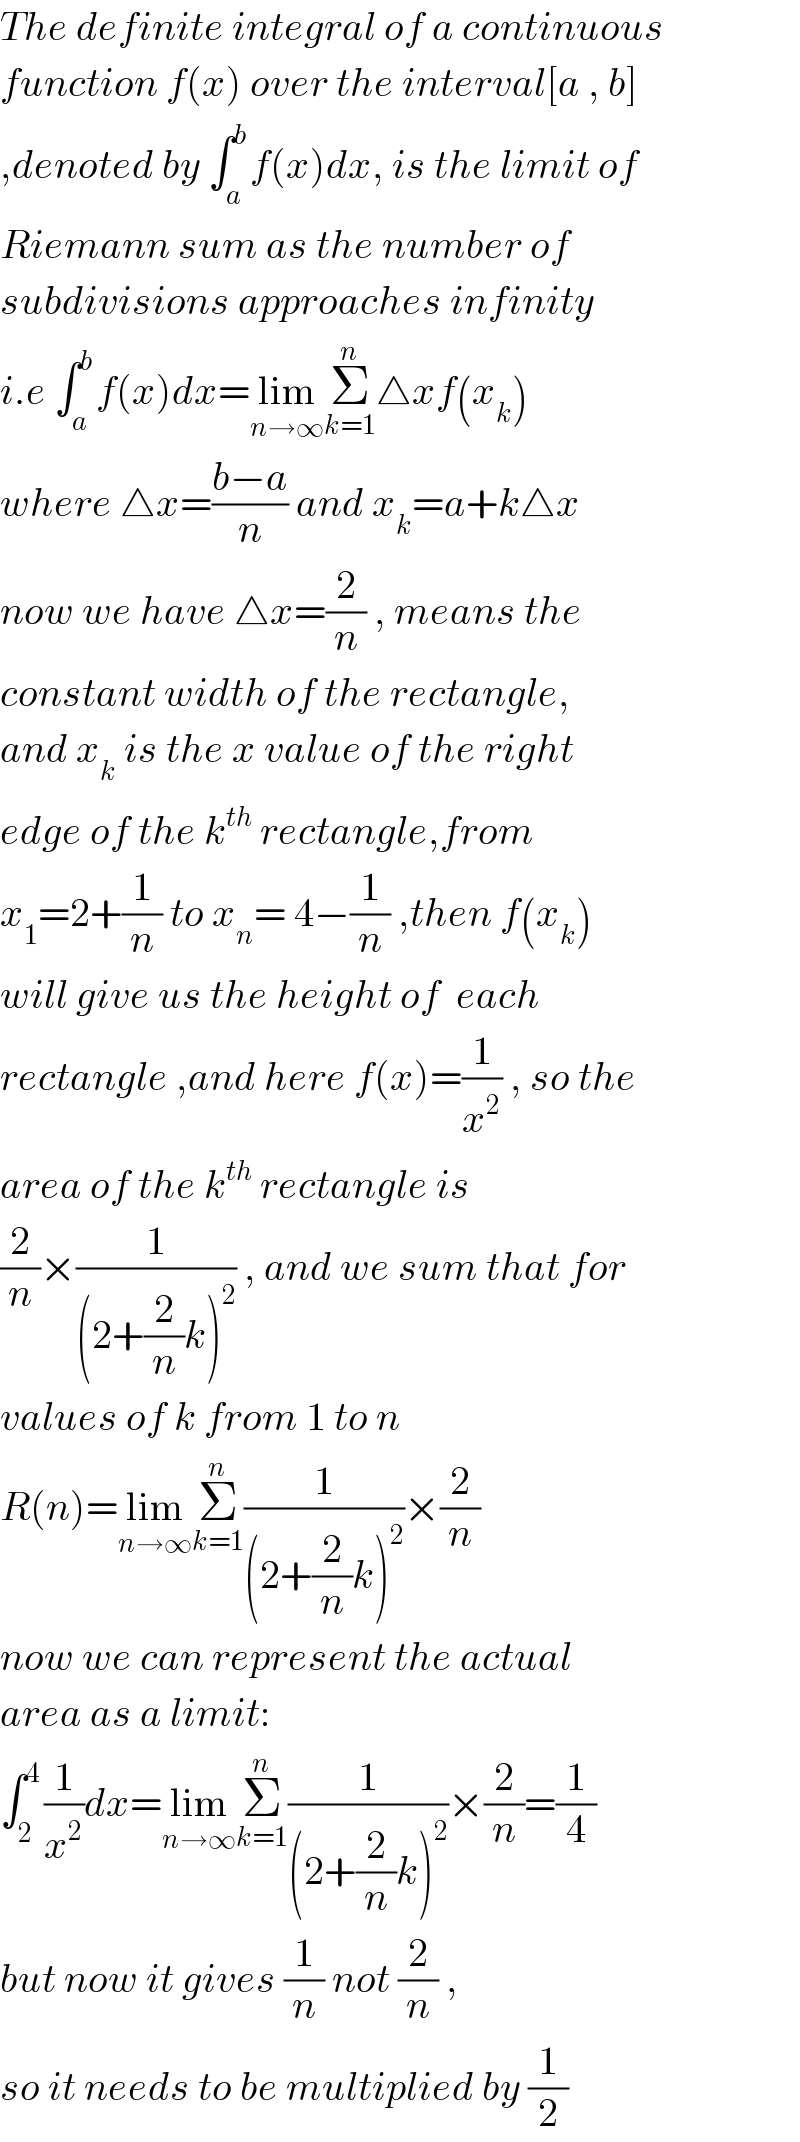 The definite integral of a continuous  function f(x) over the interval[a , b]  ,denoted by ∫_a ^b f(x)dx, is the limit of   Riemann sum as the number of  subdivisions approaches infinity  i.e ∫_a ^b f(x)dx=lim_(n→∞) Σ_(k=1) ^n △xf(x_k )  where △x=((b−a)/n) and x_k =a+k△x  now we have △x=(2/n) , means the  constant width of the rectangle,  and x_k  is the x value of the right   edge of the k^(th)  rectangle,from  x_1 =2+(1/n) to x_n = 4−(1/n) ,then f(x_k )  will give us the height of  each  rectangle ,and here f(x)=(1/x^2 ) , so the  area of the k^(th)  rectangle is  (2/n)×(1/((2+(2/n)k)^2 )) , and we sum that for  values of k from 1 to n  R(n)=lim_(n→∞) Σ_(k=1) ^n (1/((2+(2/n)k)^2 ))×(2/n)  now we can represent the actual  area as a limit:  ∫_(2 ) ^4 (1/x^2 )dx=lim_(n→∞) Σ_(k=1) ^n (1/((2+(2/n)k)^2 ))×(2/n)=(1/4)  but now it gives (1/n) not (2/n) ,  so it needs to be multiplied by (1/2)  